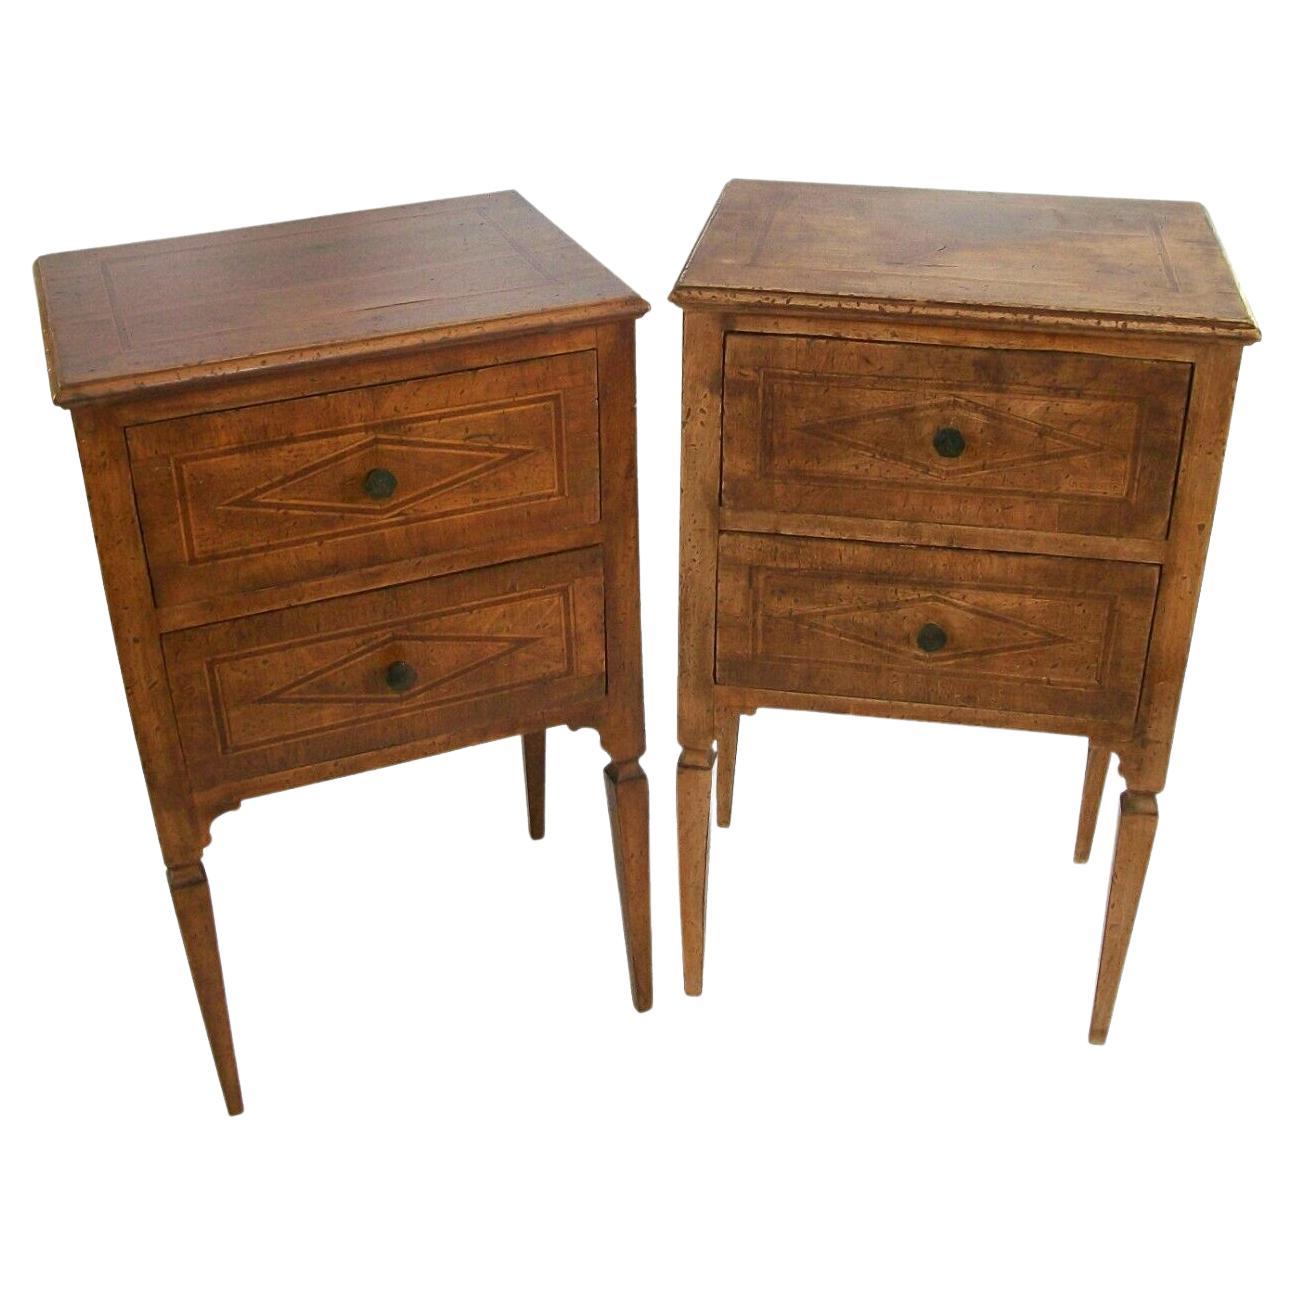 North Italian Antique Pair of Walnut Neoclassical Bedside Tables, Circa 1820 For Sale